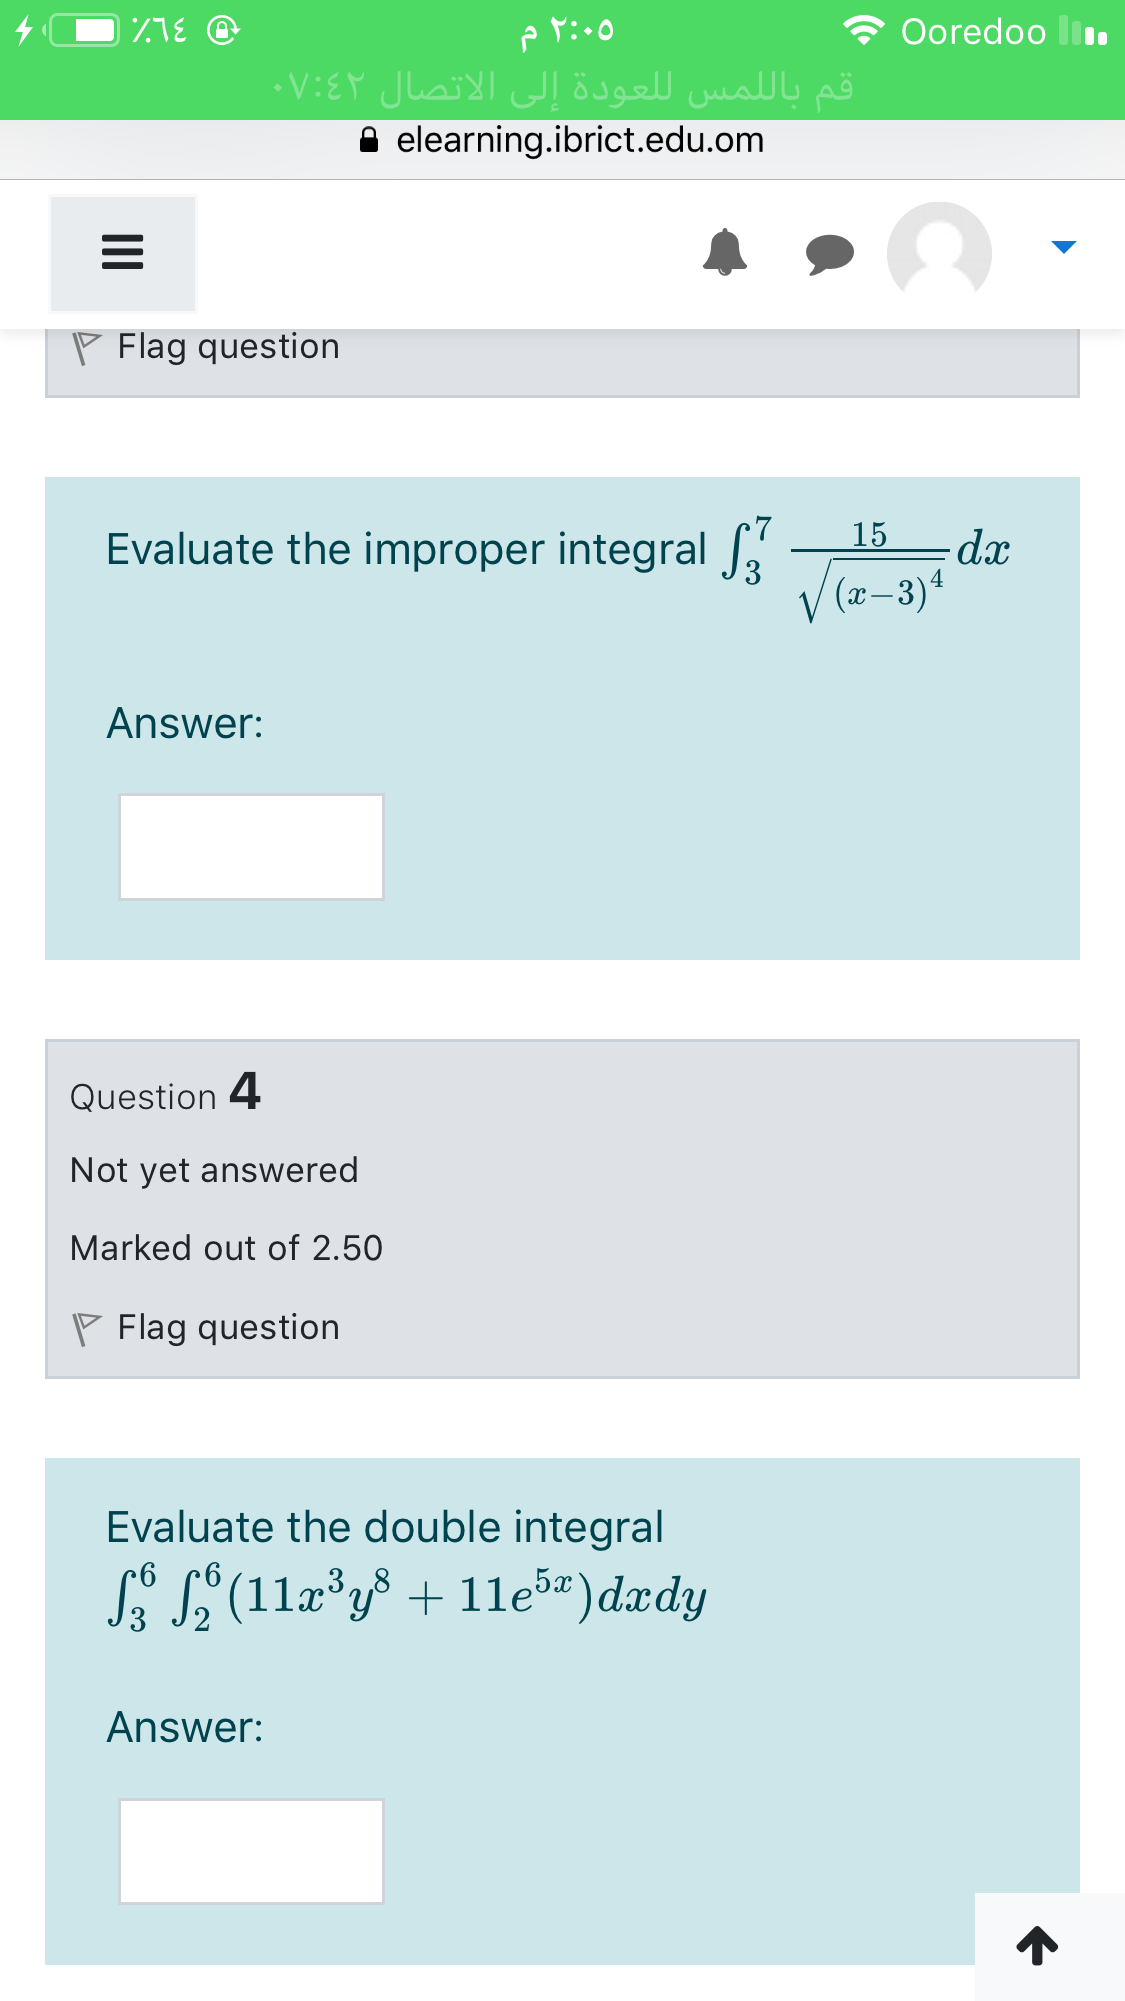 Ooredoo ll.
قم بال لمس ل لعودة إلى الاتصال ۷:۶۲ء
A elearning.ibrict.edu.om
P Flag question
15
Evaluate the improper integral
V(z-3)4
Answer:
Question 4
Not yet answered
Marked out of 2.50
P Flag question
Evaluate the double integral
S S (11a°y³ + 11eš)dædy
Answer:
